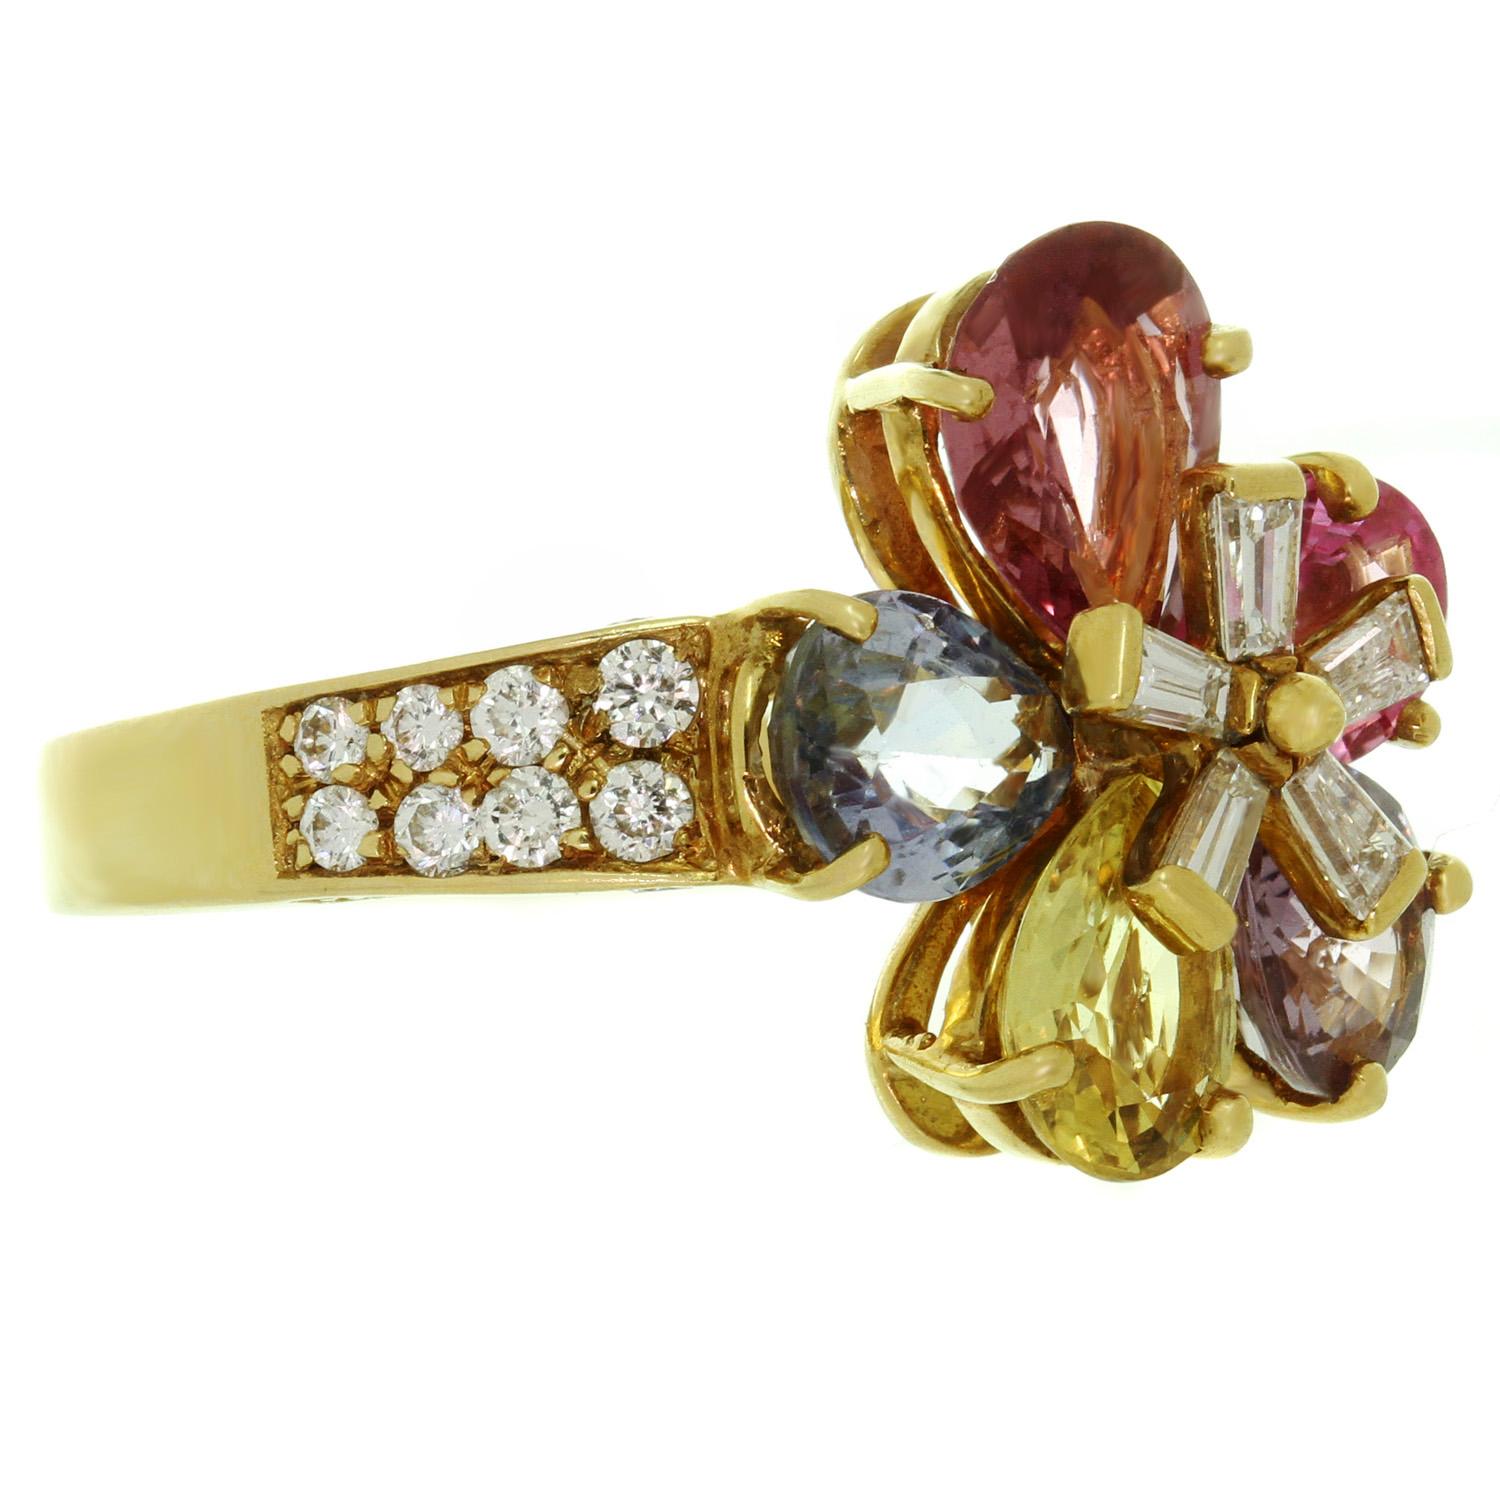 This exquisite ring from Bulgari's Flower collection is crafted in 18k yellow gold and features a diamond center and five petals of natural fancy pear-cut sapphires in beautiful shades of pink and blue weighing an estimated 4.50 carats. The shank is